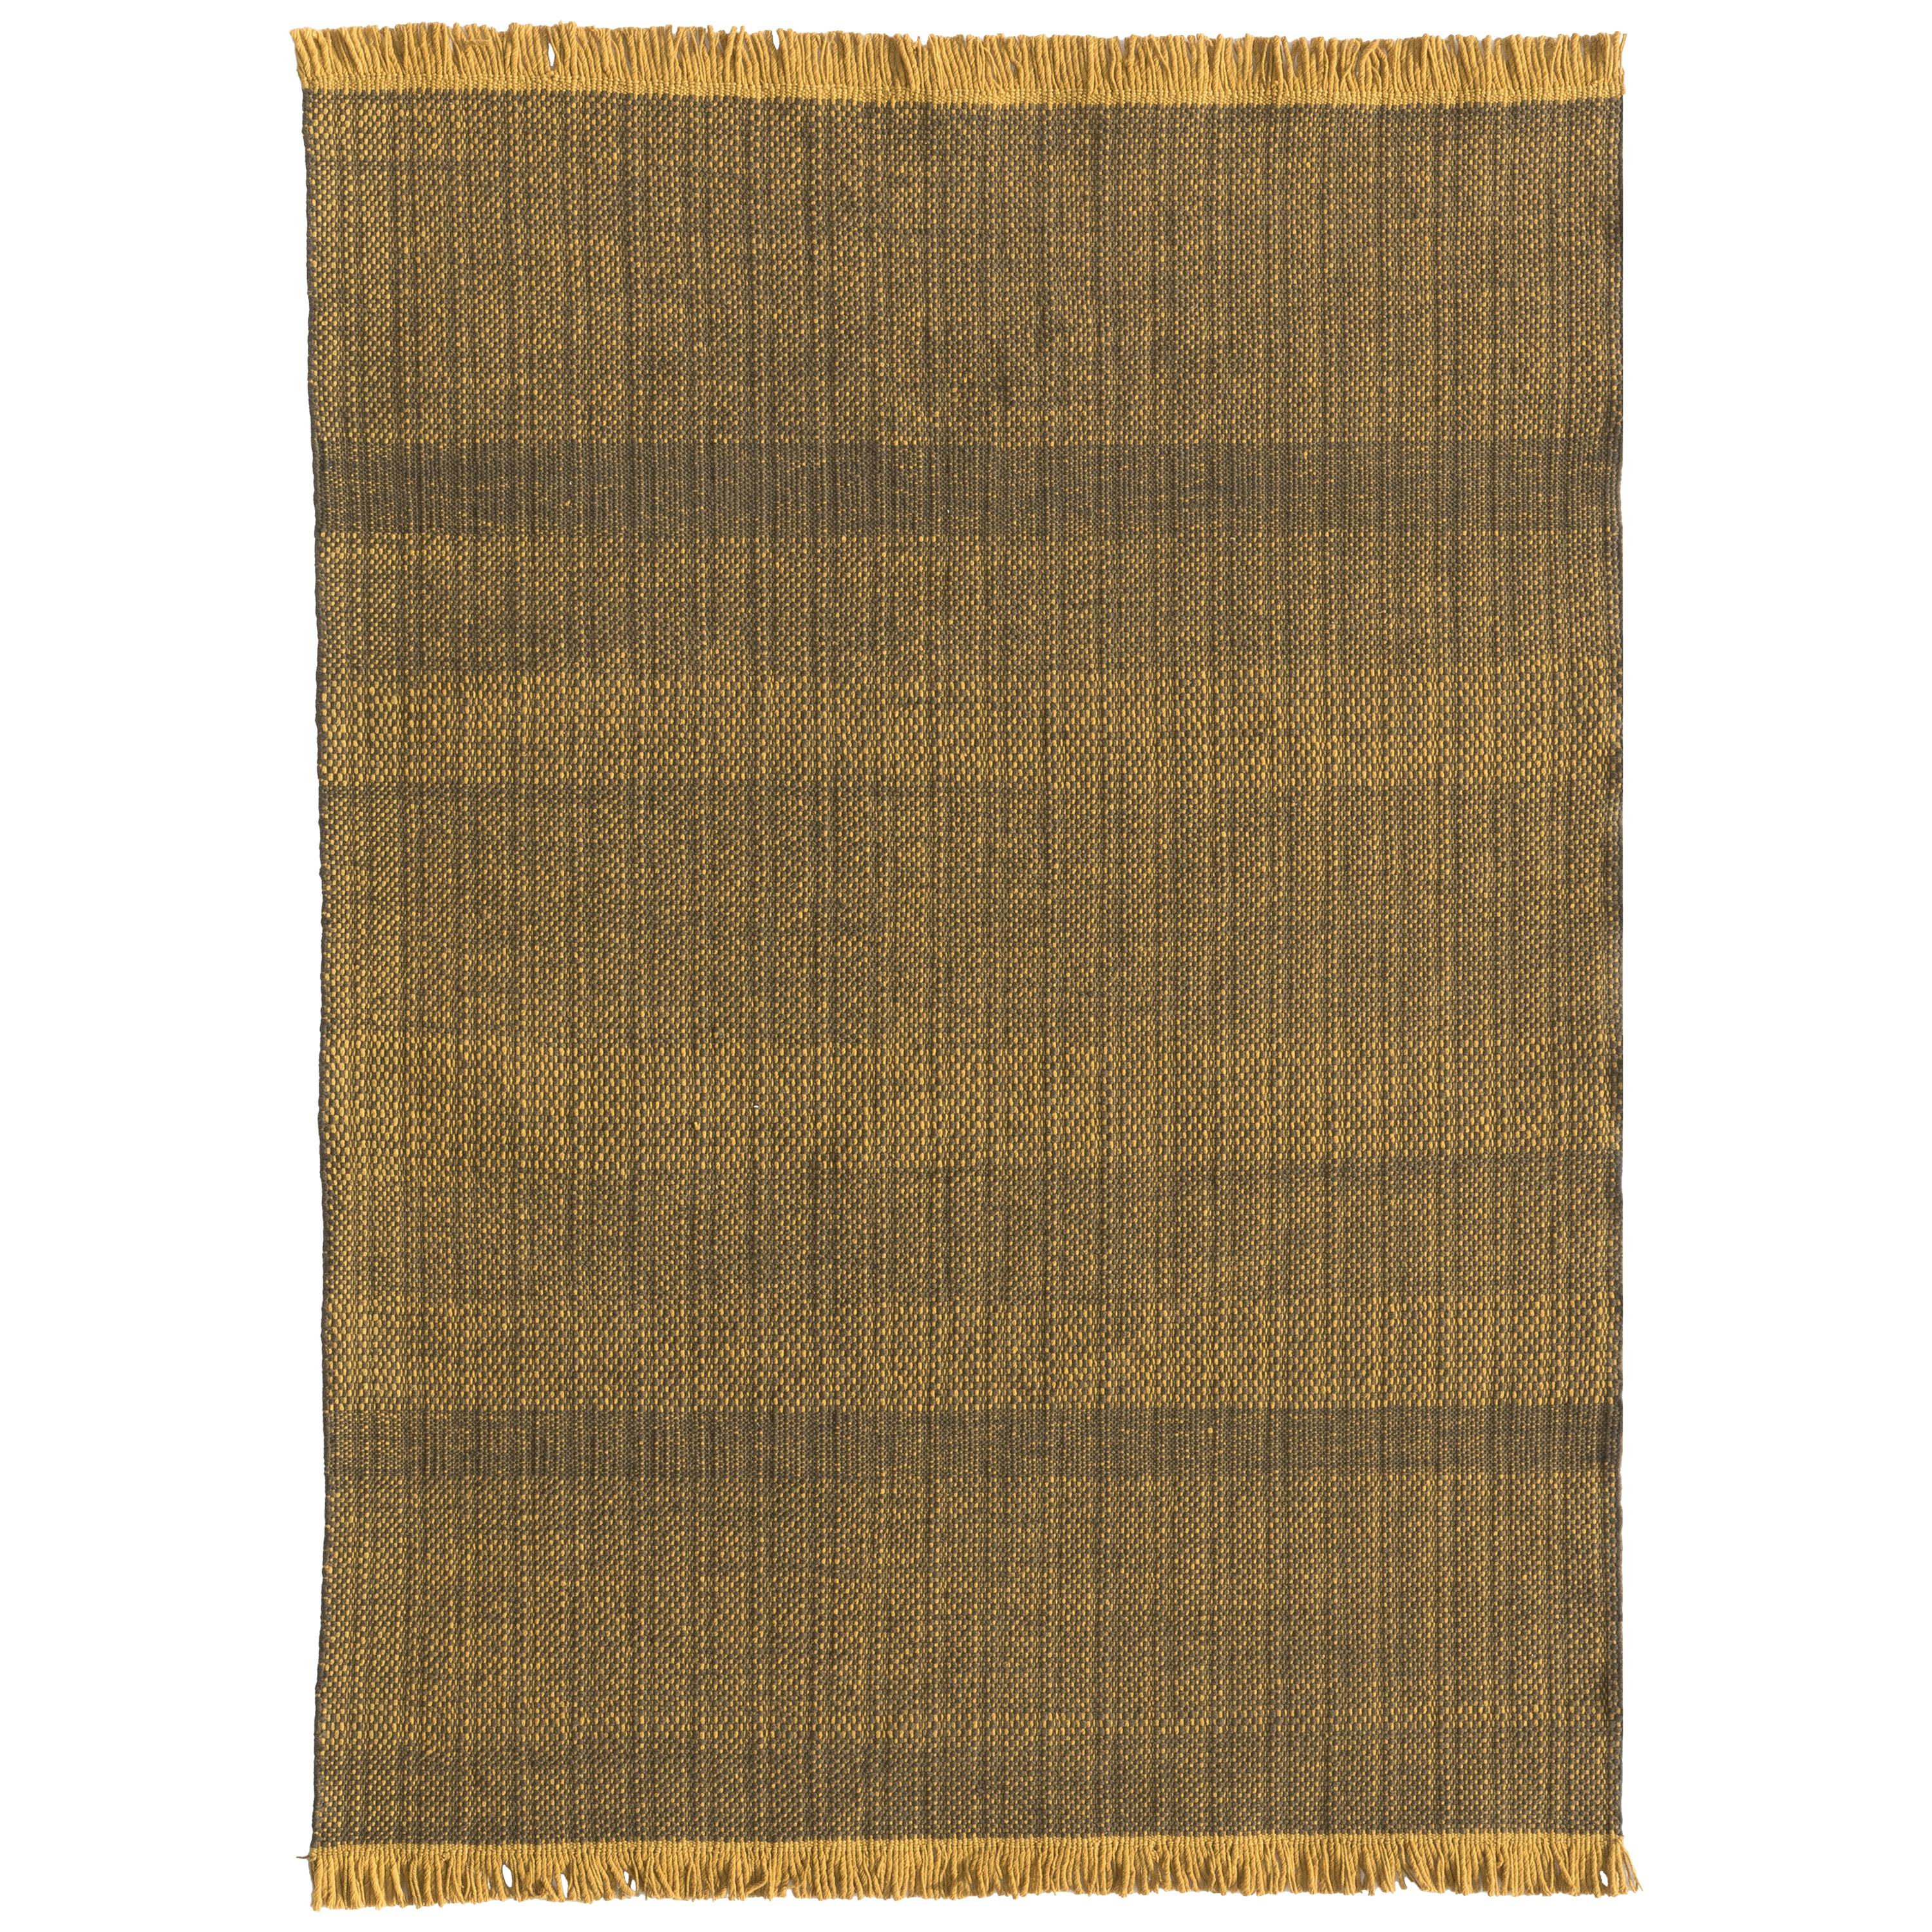 Tres Outdoor Rug in Mustard by Nani Marquina, Small